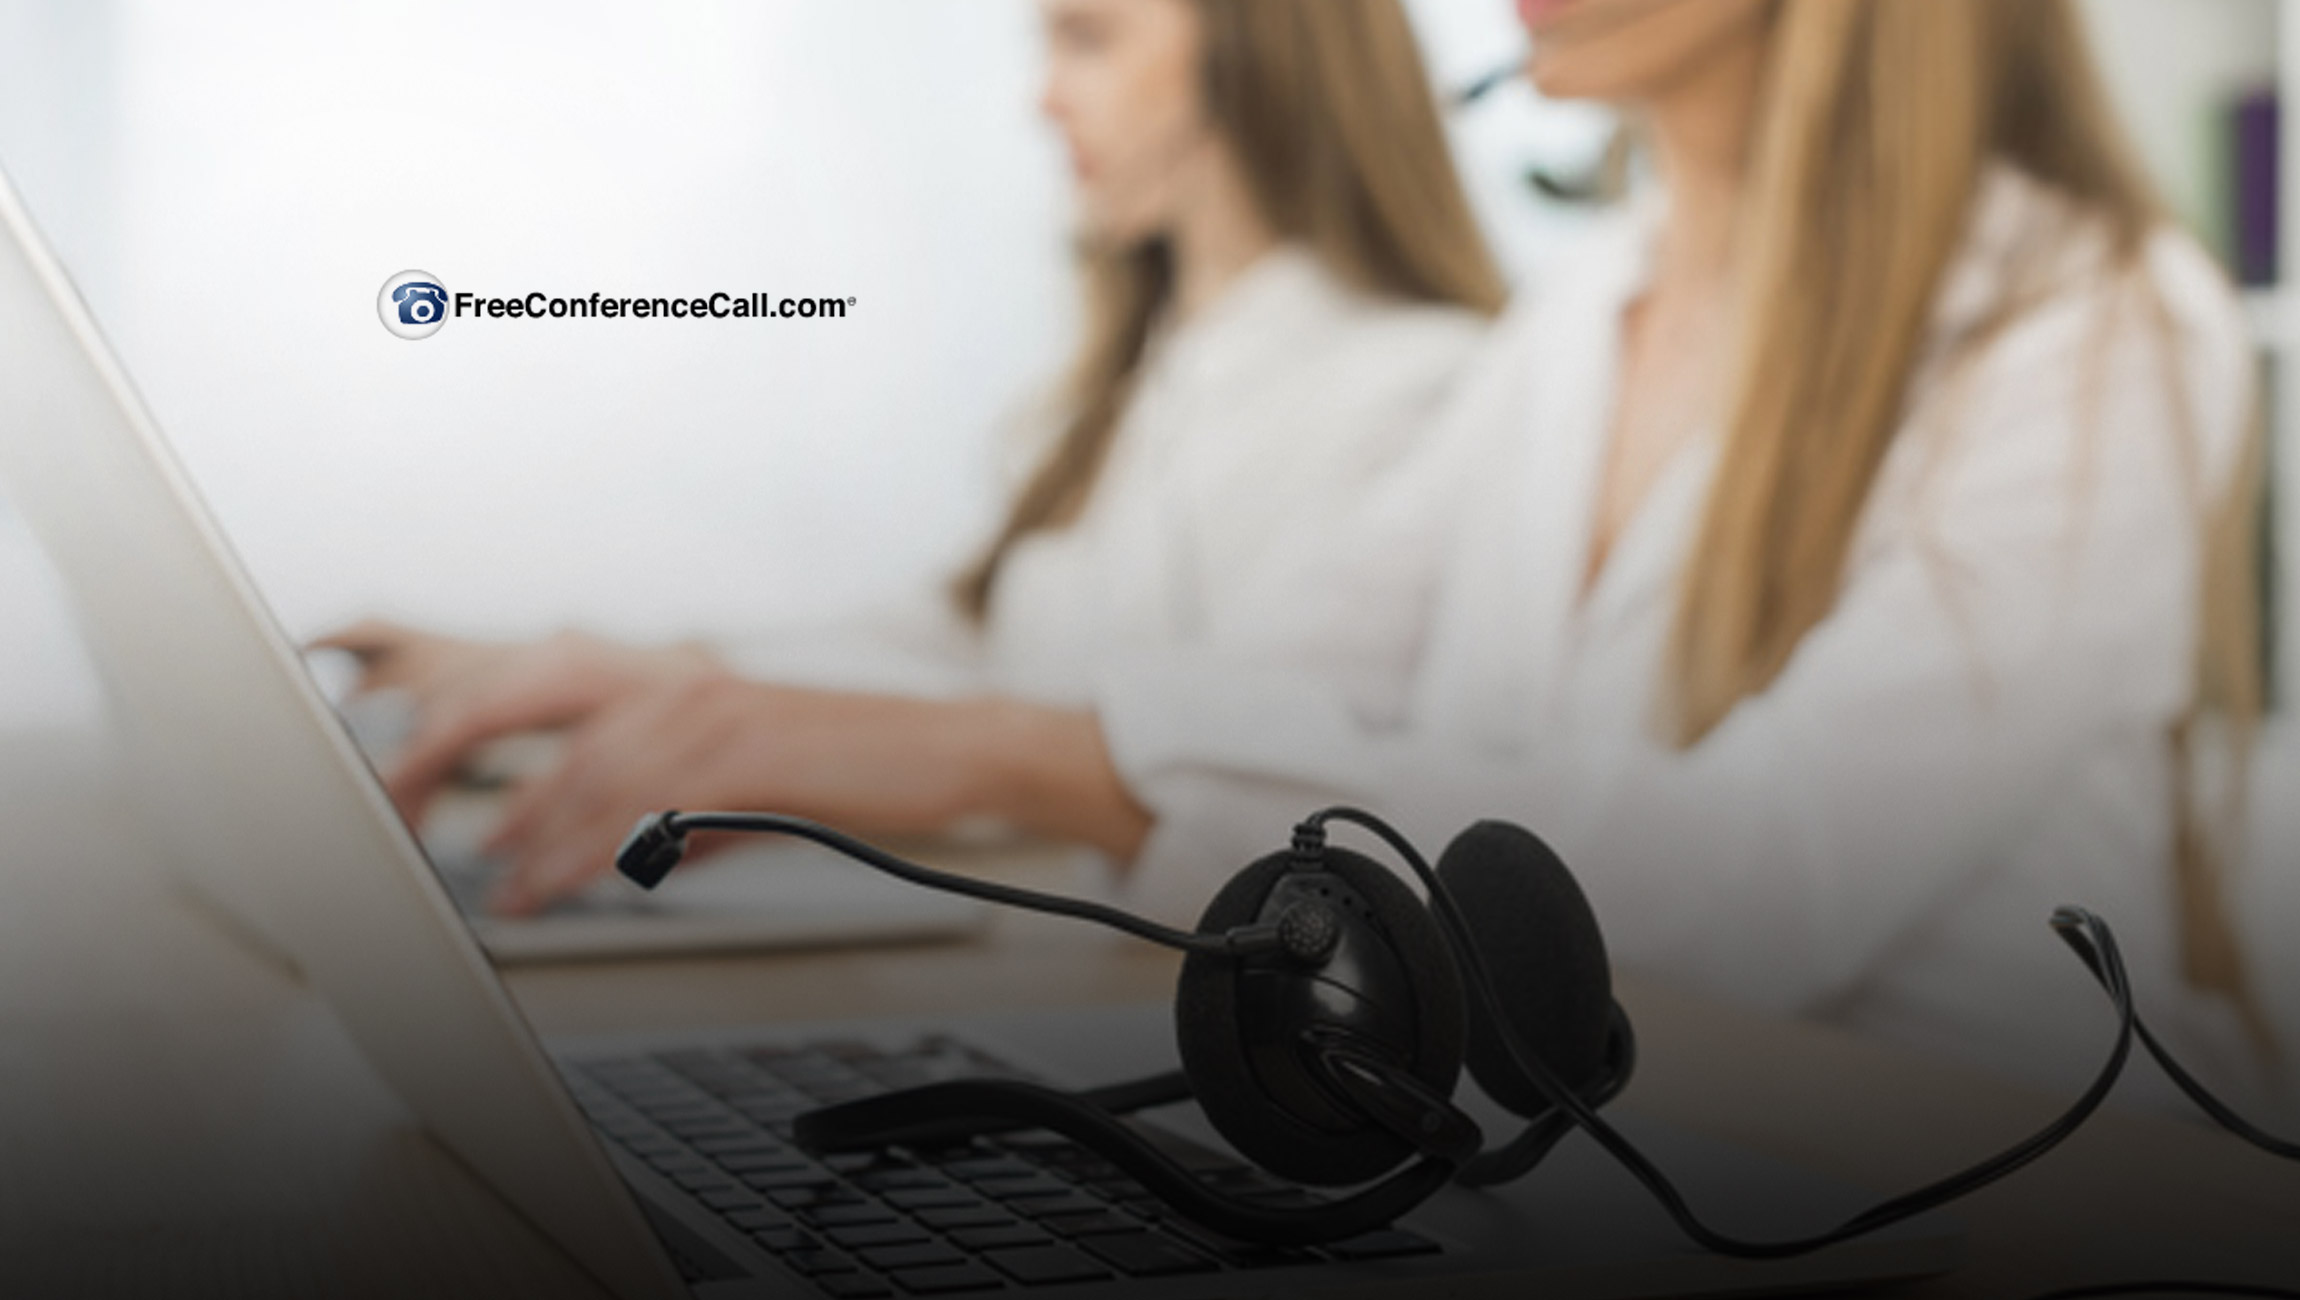 FreeConferenceCall.com is Ranked Best in Conferencing Services by Forbes